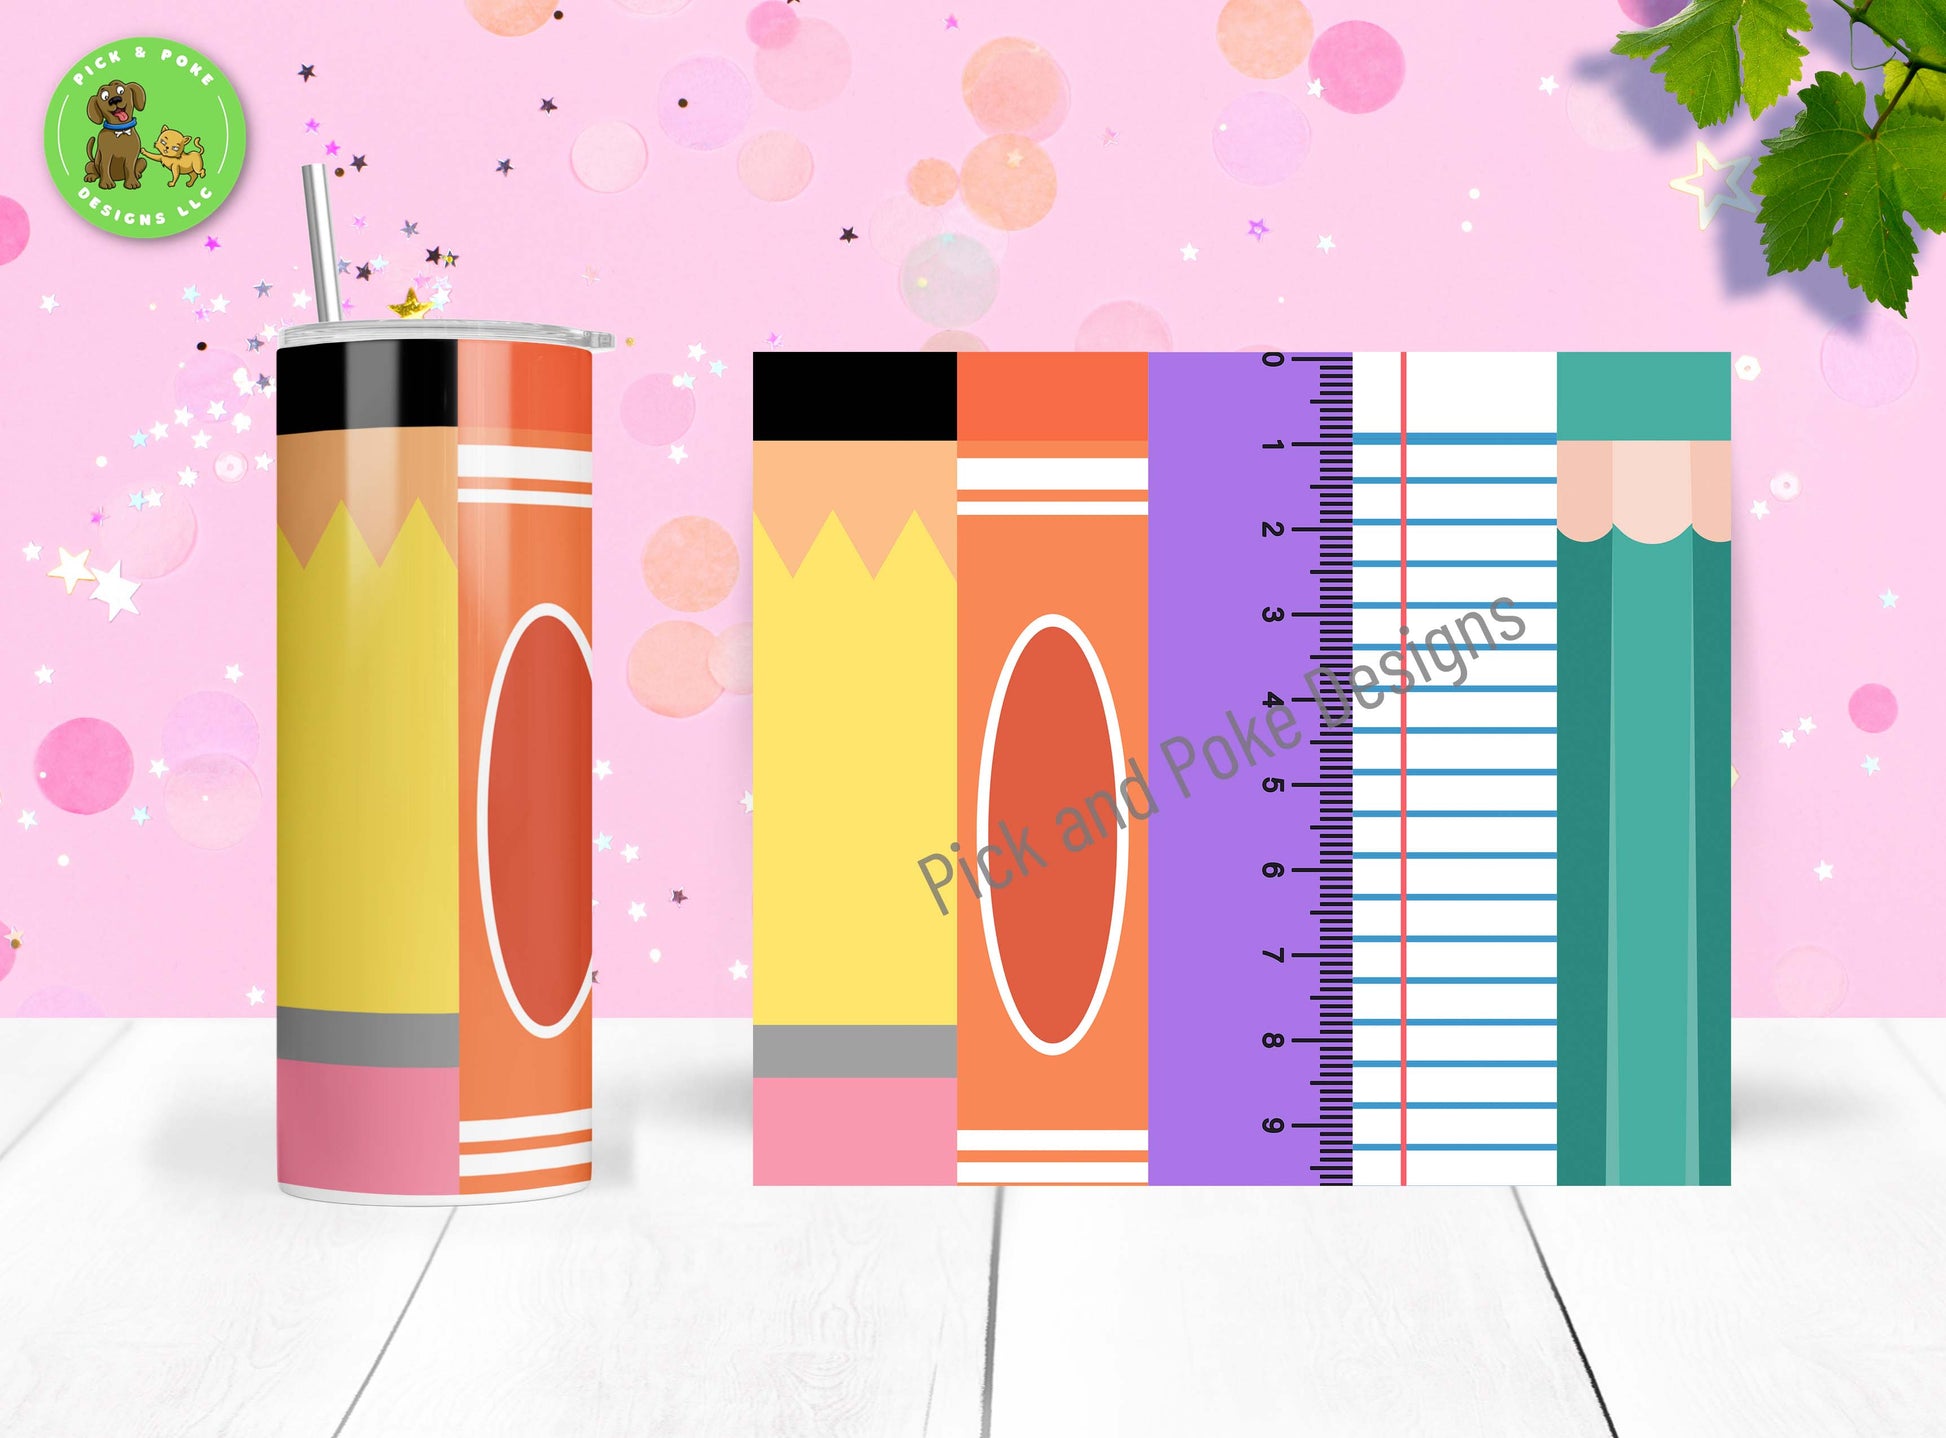 School supplies tumbler has a sublimated design printed on the tumbler and comes with a reusable straw and plastic lid. 